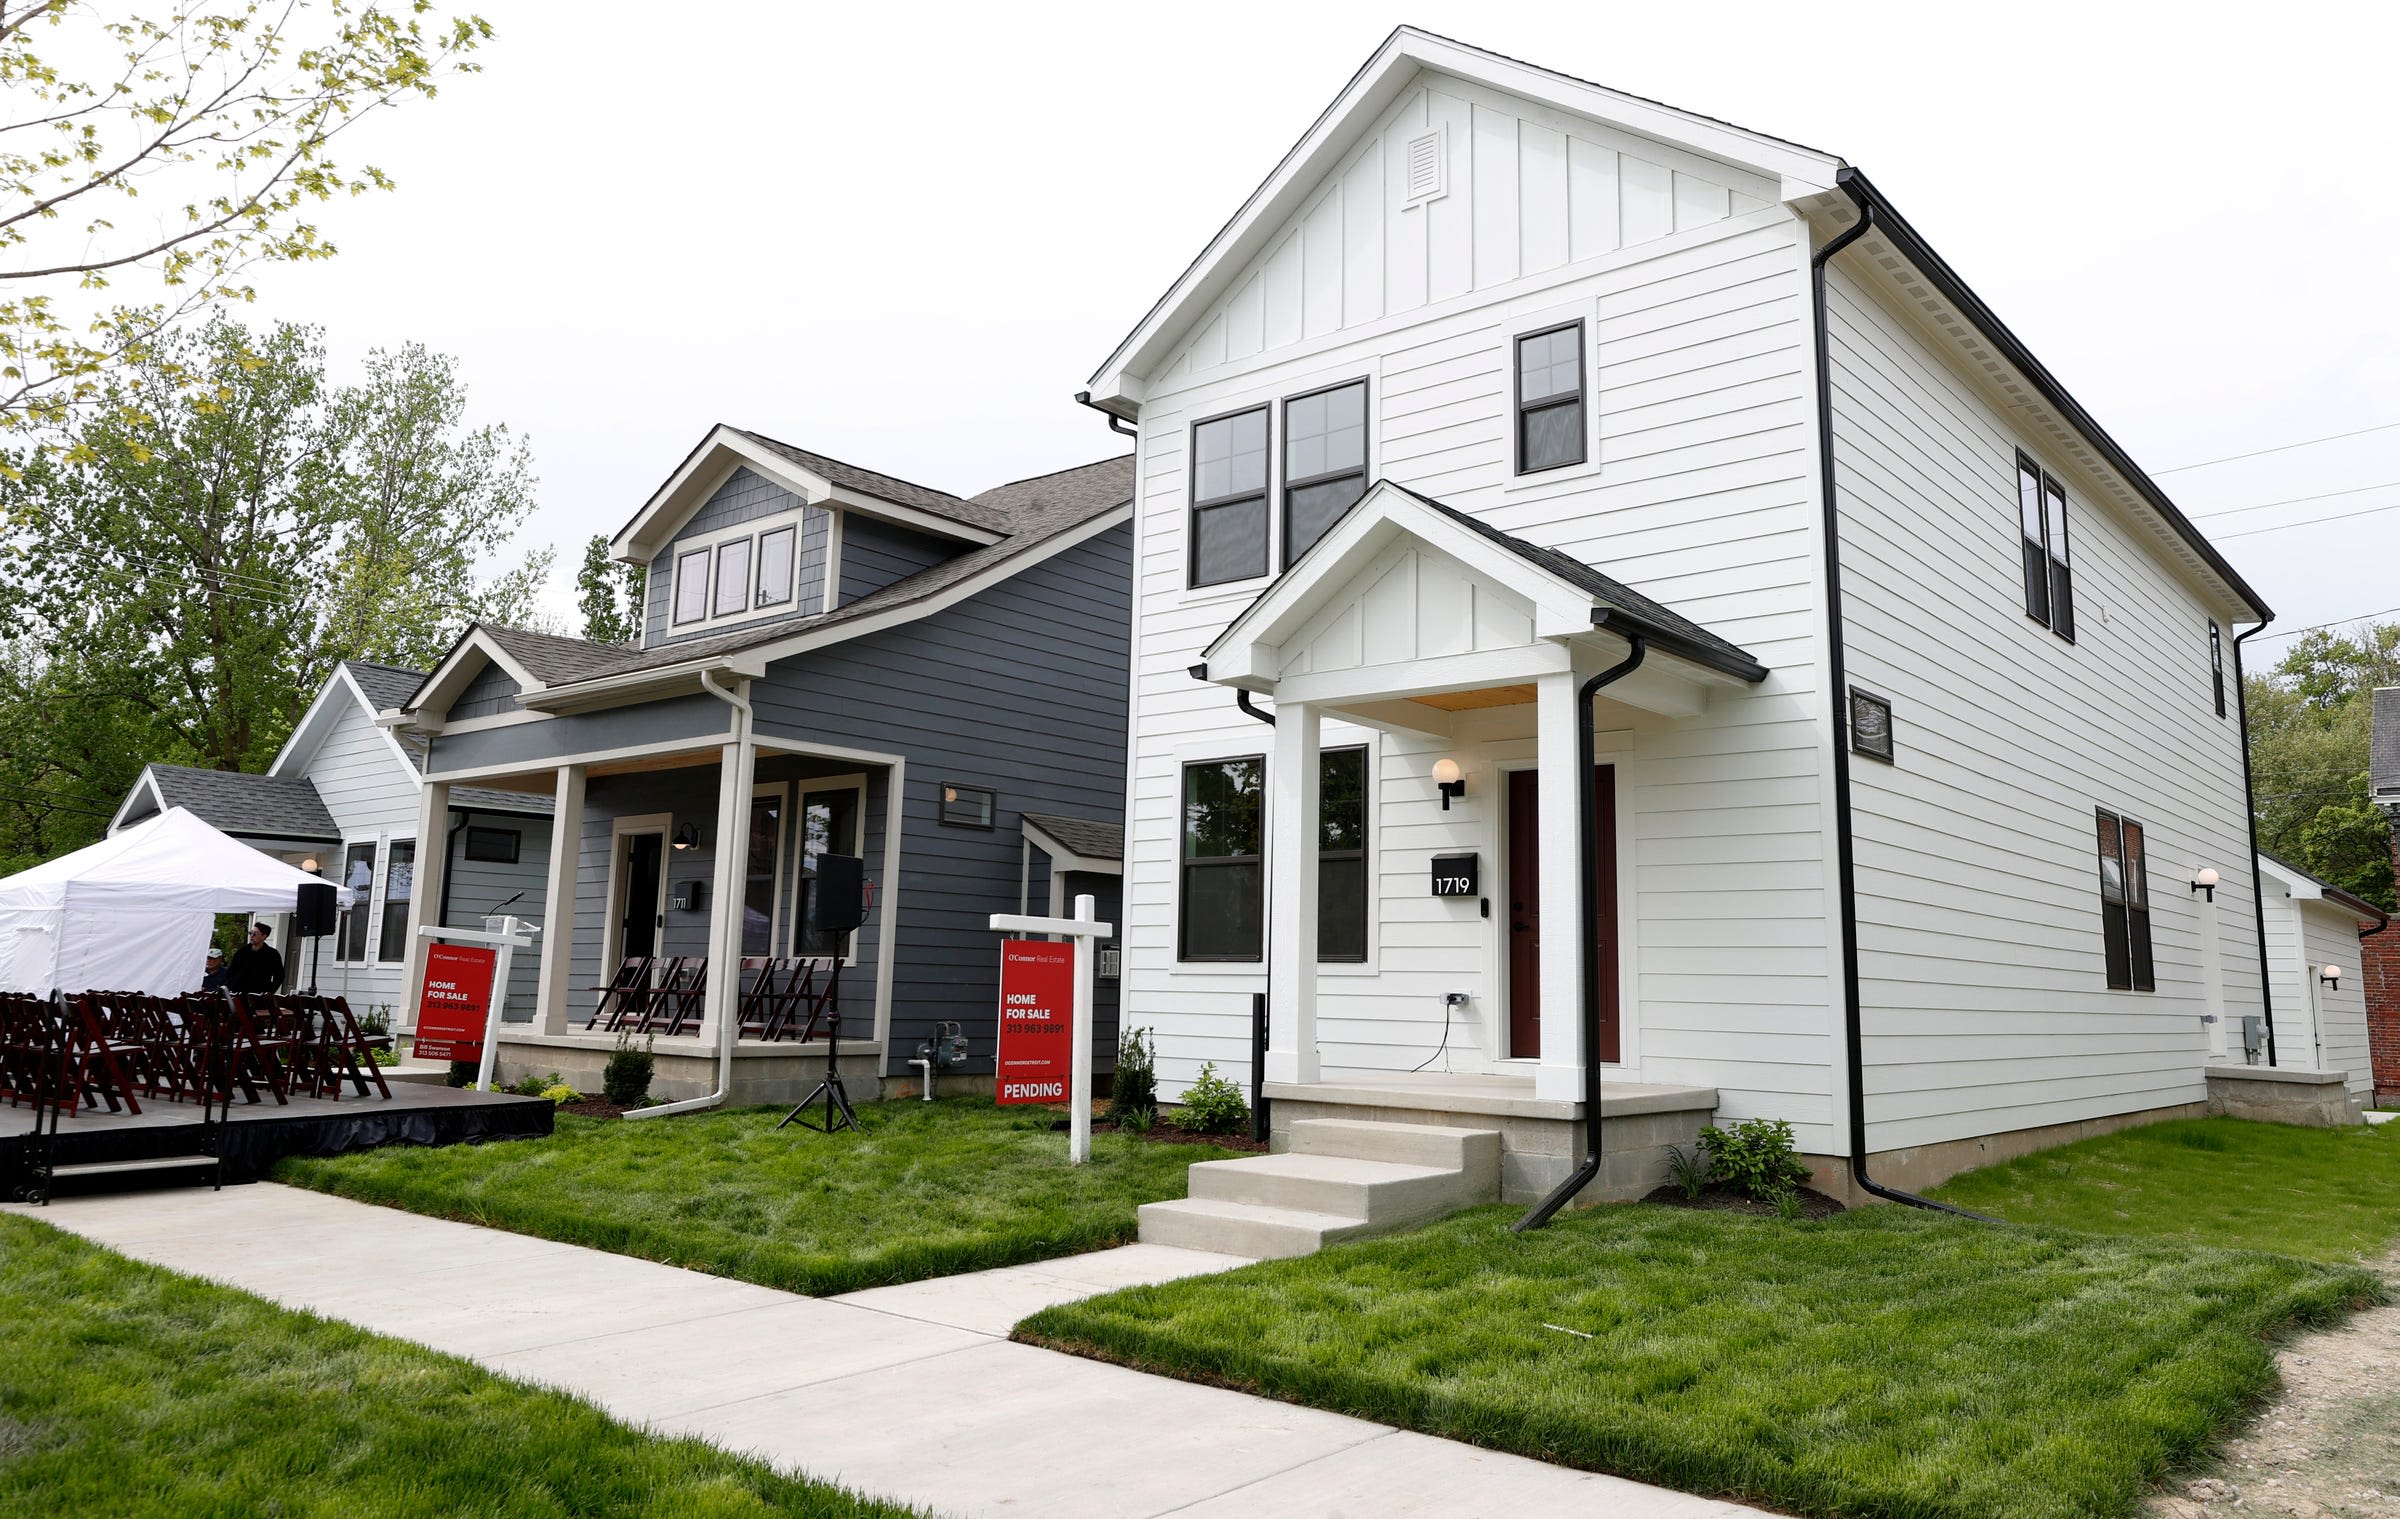 Metro Detroit real estate: More inventory for buyers, sellers unwilling to drop prices